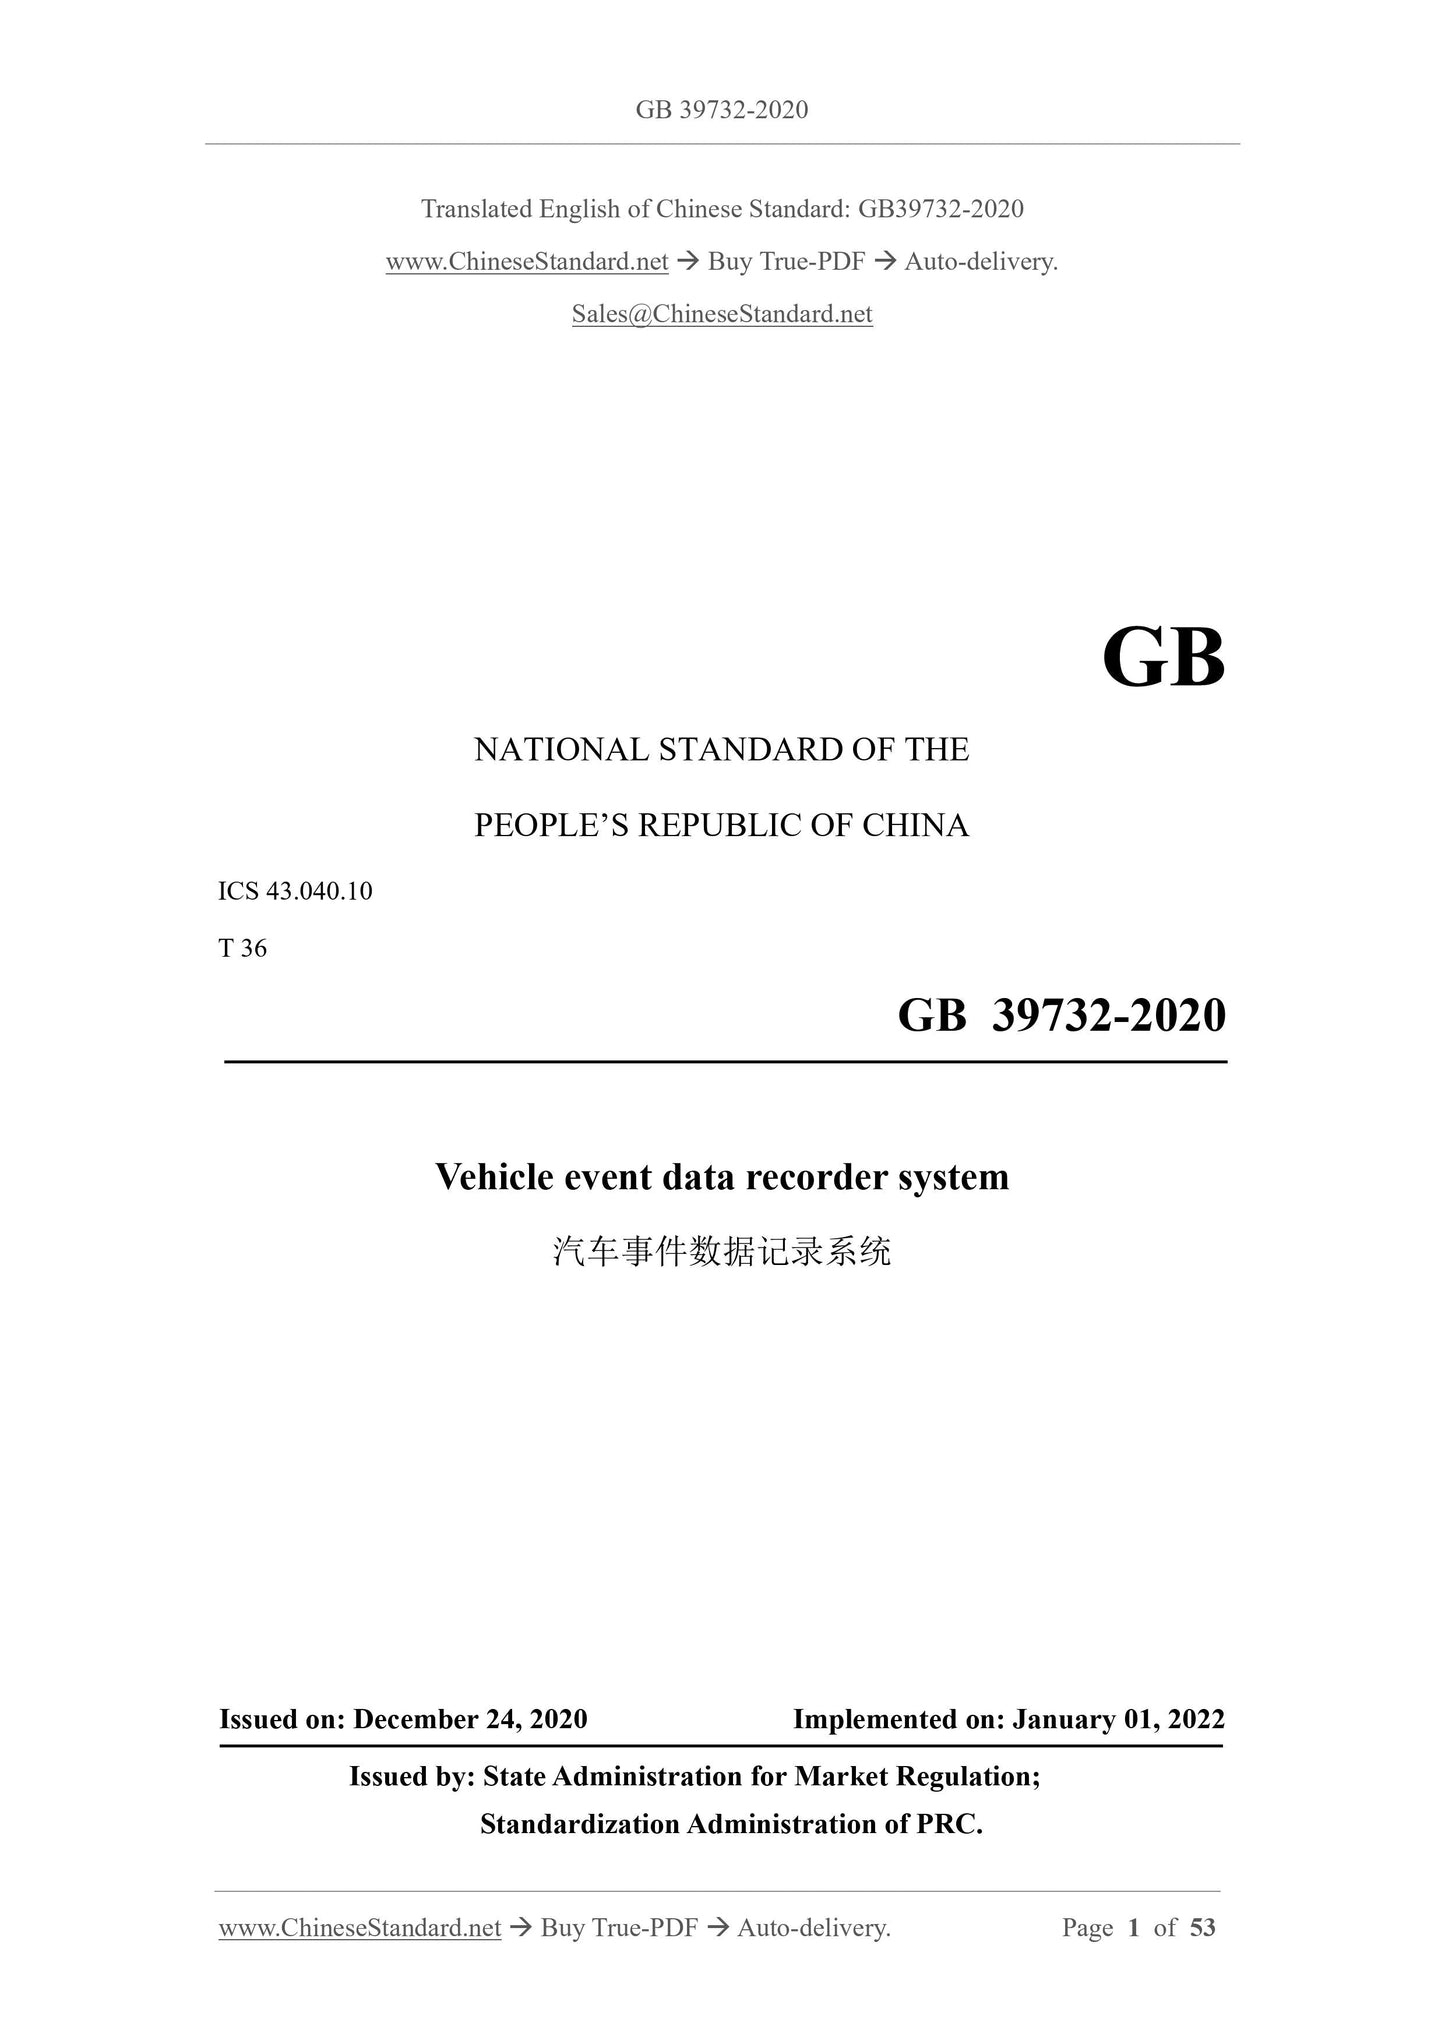 GB 39732-2020 Page 1